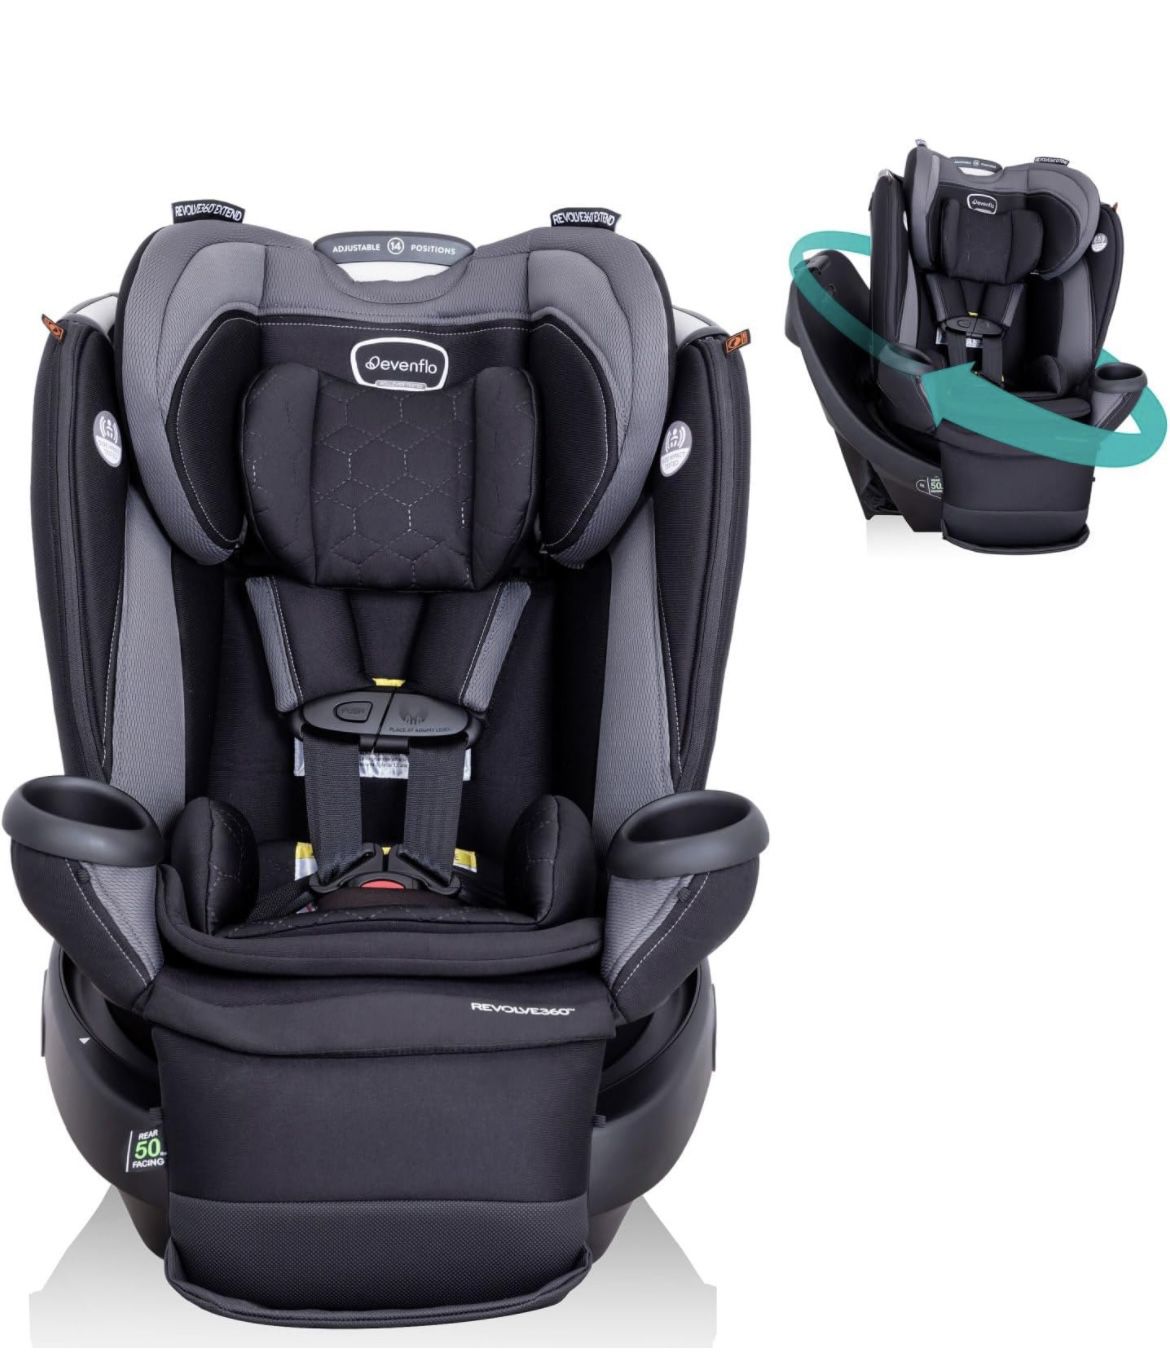 **NEW**Evenflo Revolve360 Extend All-in-One Rotational Car Seat with Quick Clean Cover